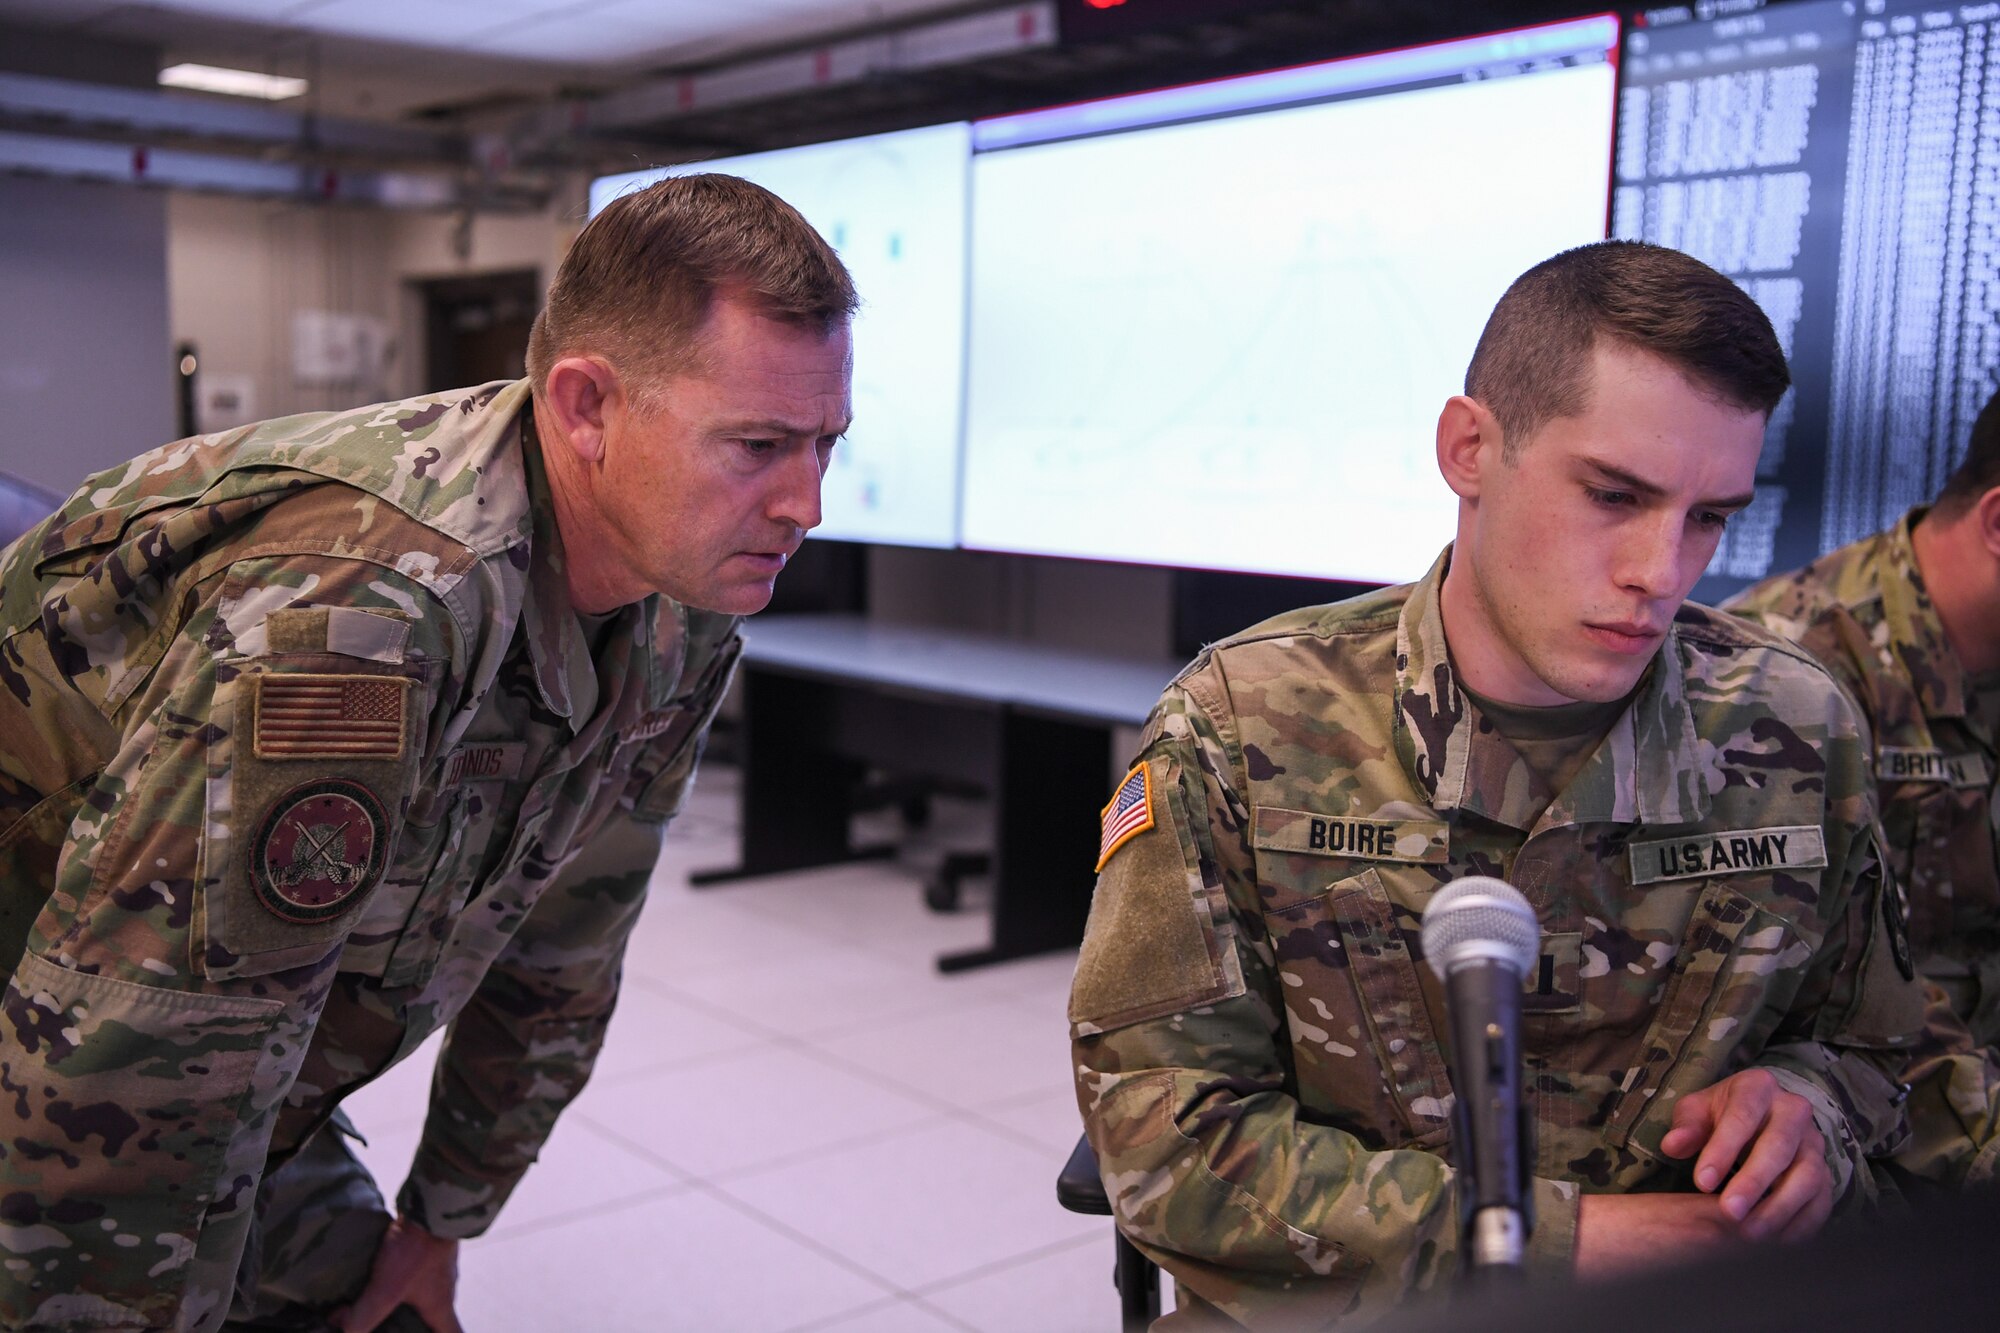 Lt. Col. Darren Edmonds, director of the Lantern, also known as the Hanscom Collaboration and Innovation Center, looks on as 1st Lt. Nicholas Boire, from the Massachusetts National Guard’s 126th Cyber Protection Battalion, reviews data during a proof of concept event at Hanscom Air Force Base, Mass., May 20.